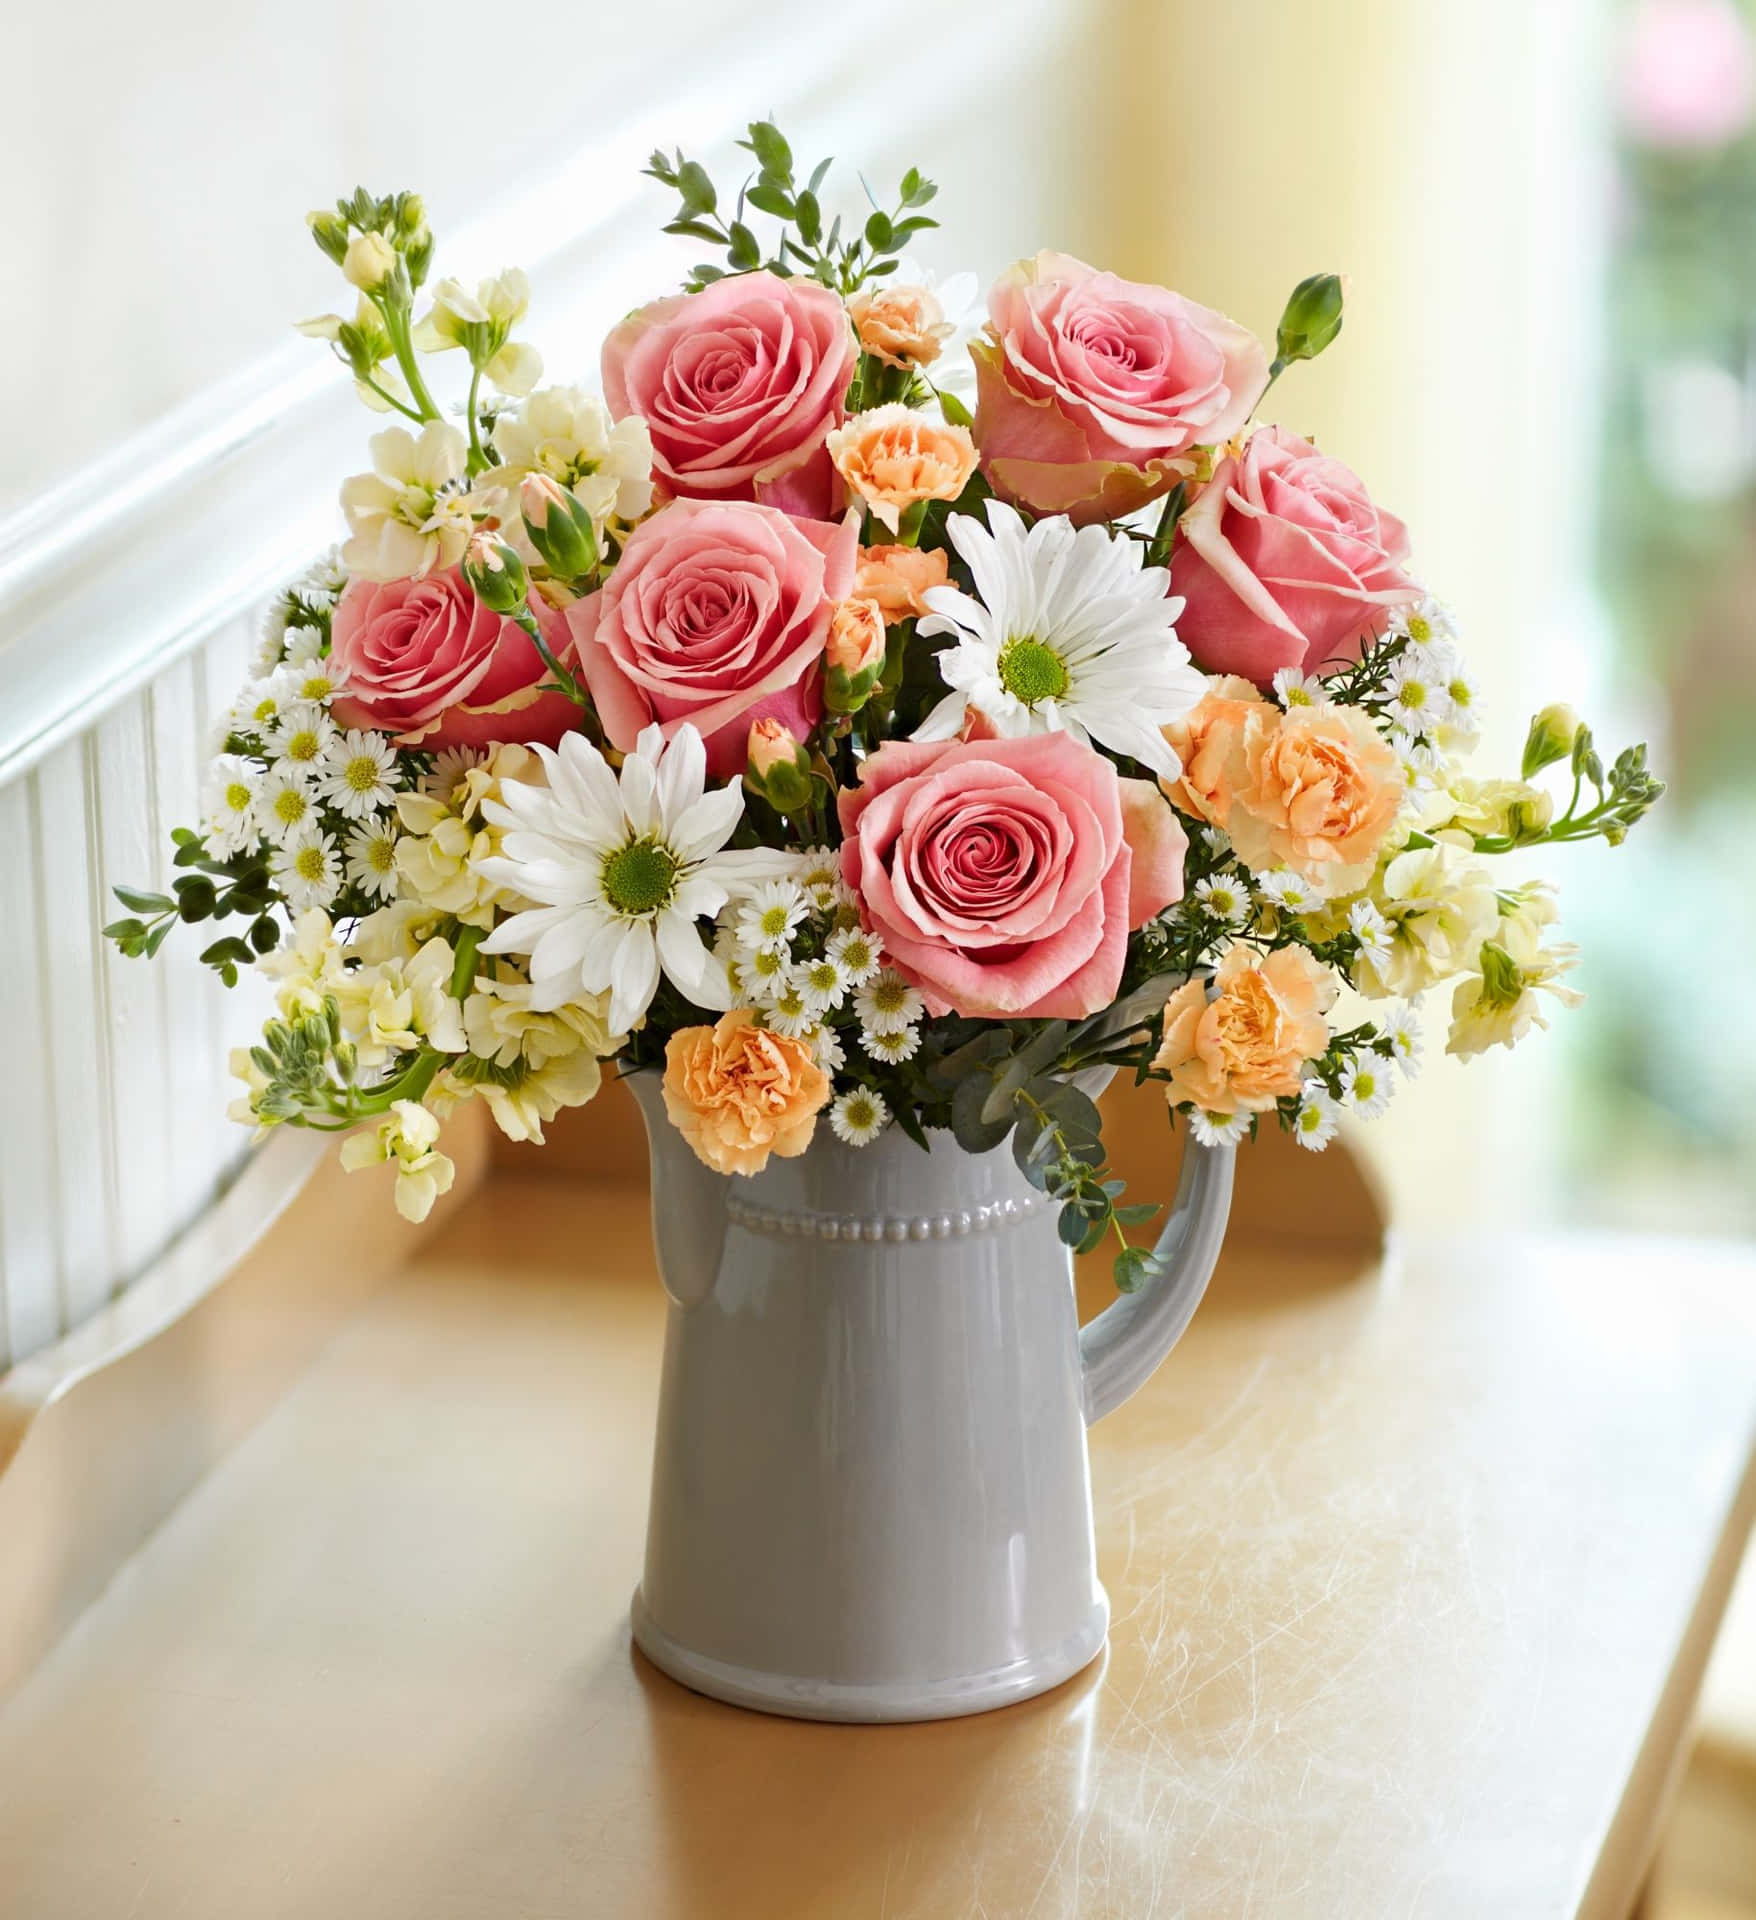 Stunning Blooms - A Collection of Exquisite Pretty Flowers